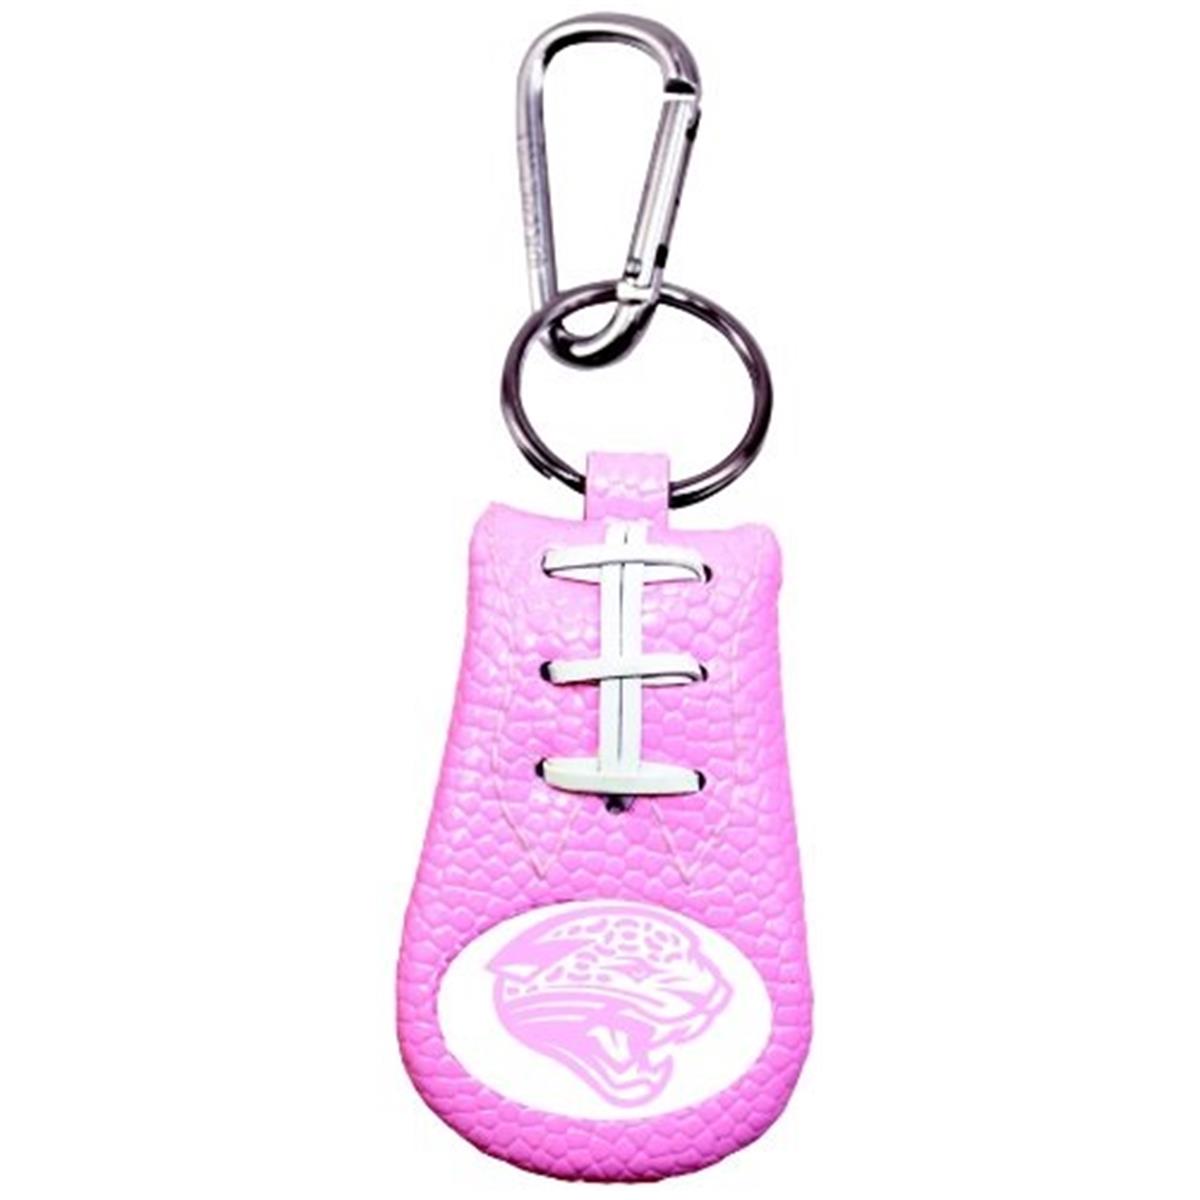 Picture of Jacksonville Jaguars Keychain Pink Football